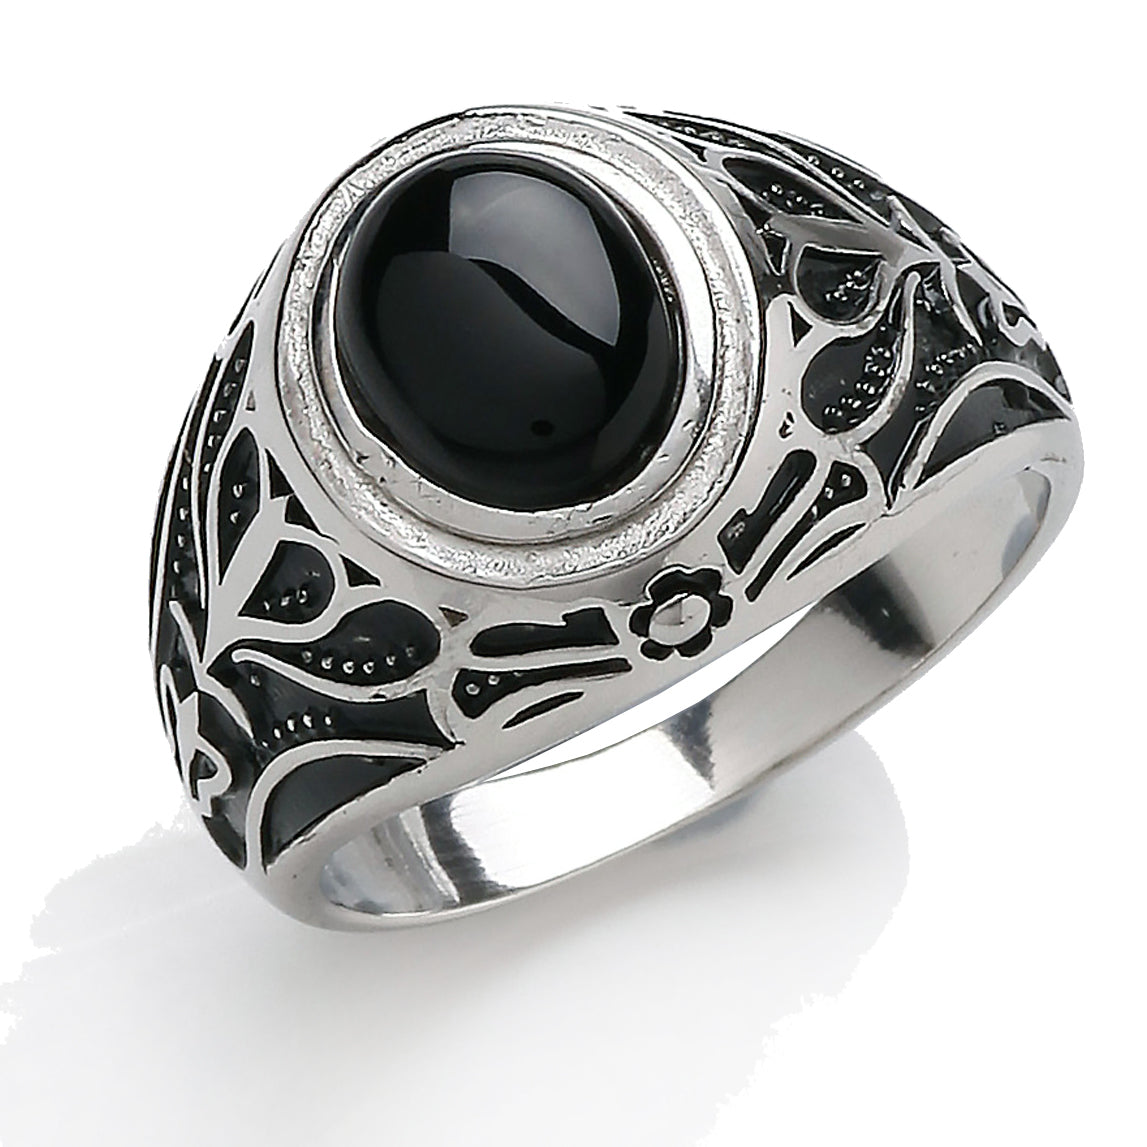 Mens Silver  Black Oval Onyx Carved Cabochon Signet Ring - GVR746